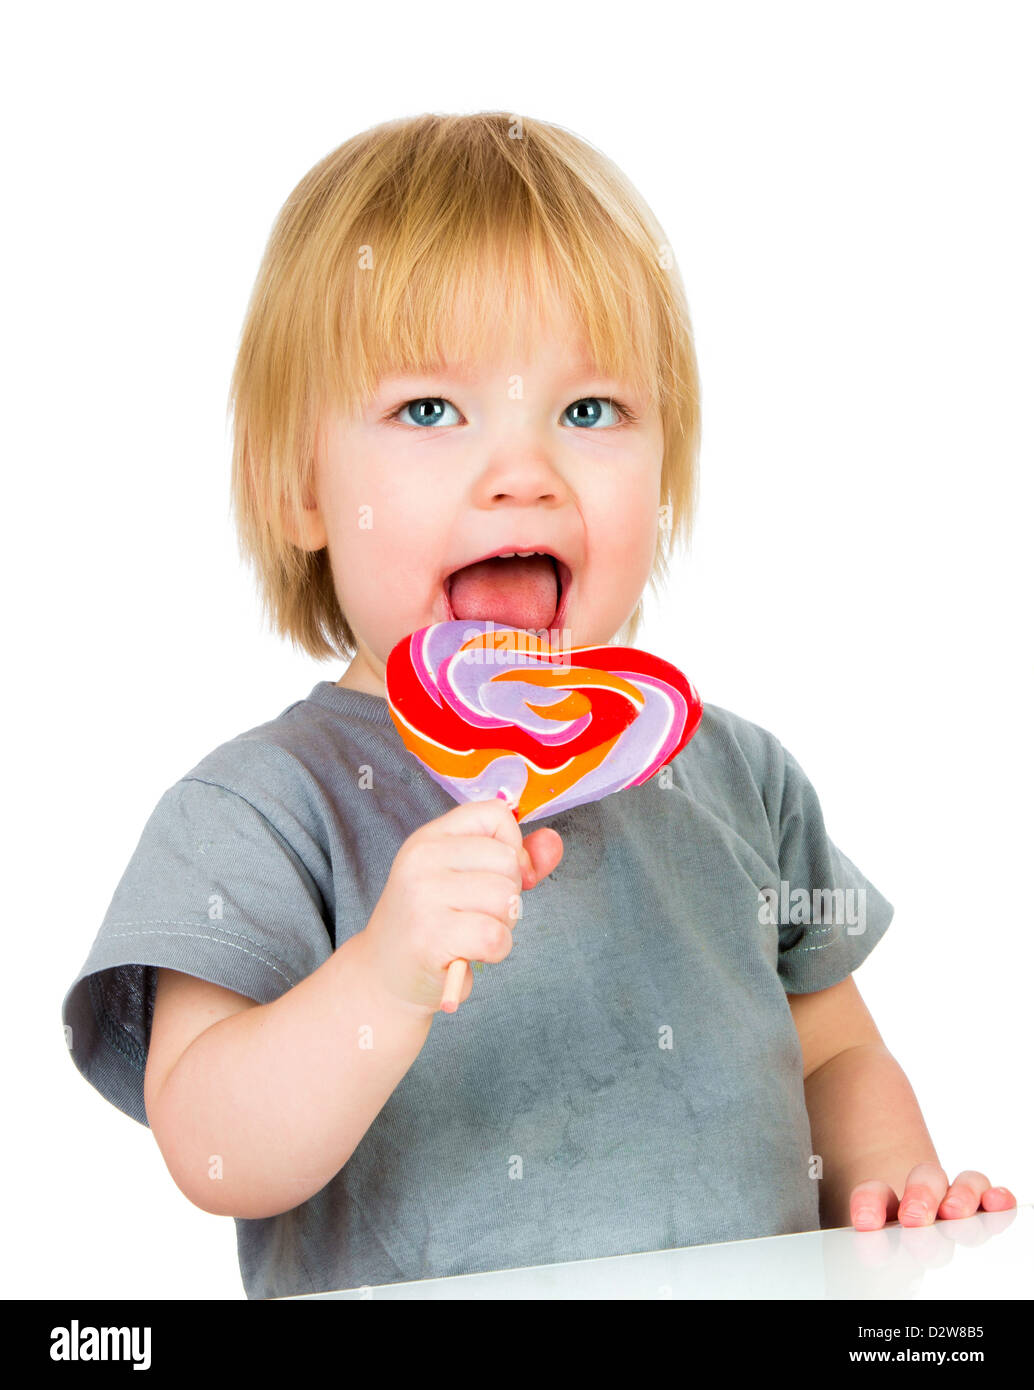 Baby eating a sticky lollipop on white background Stock Photo